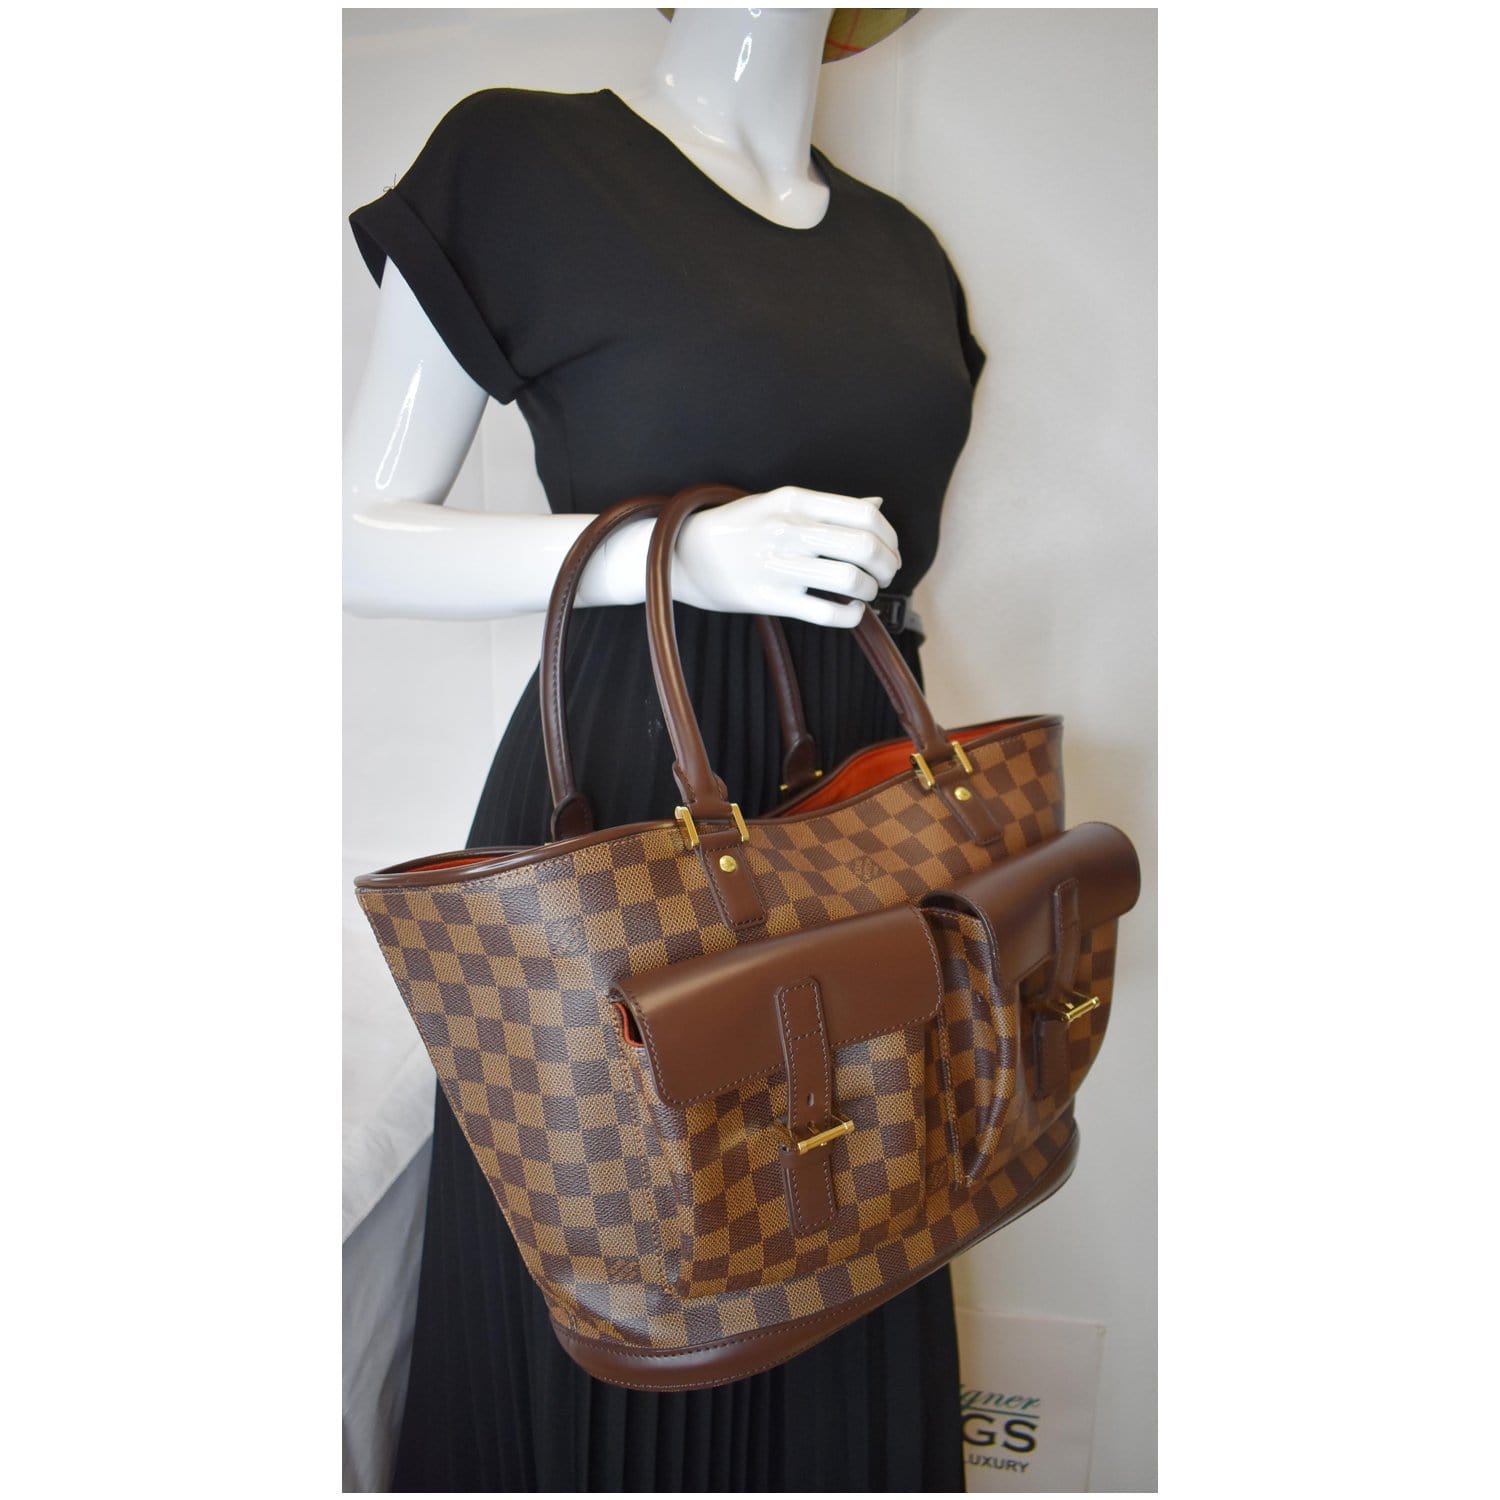 Only 478.00 usd for Louis Vuitton Damier Ebene Manosque Tote GM